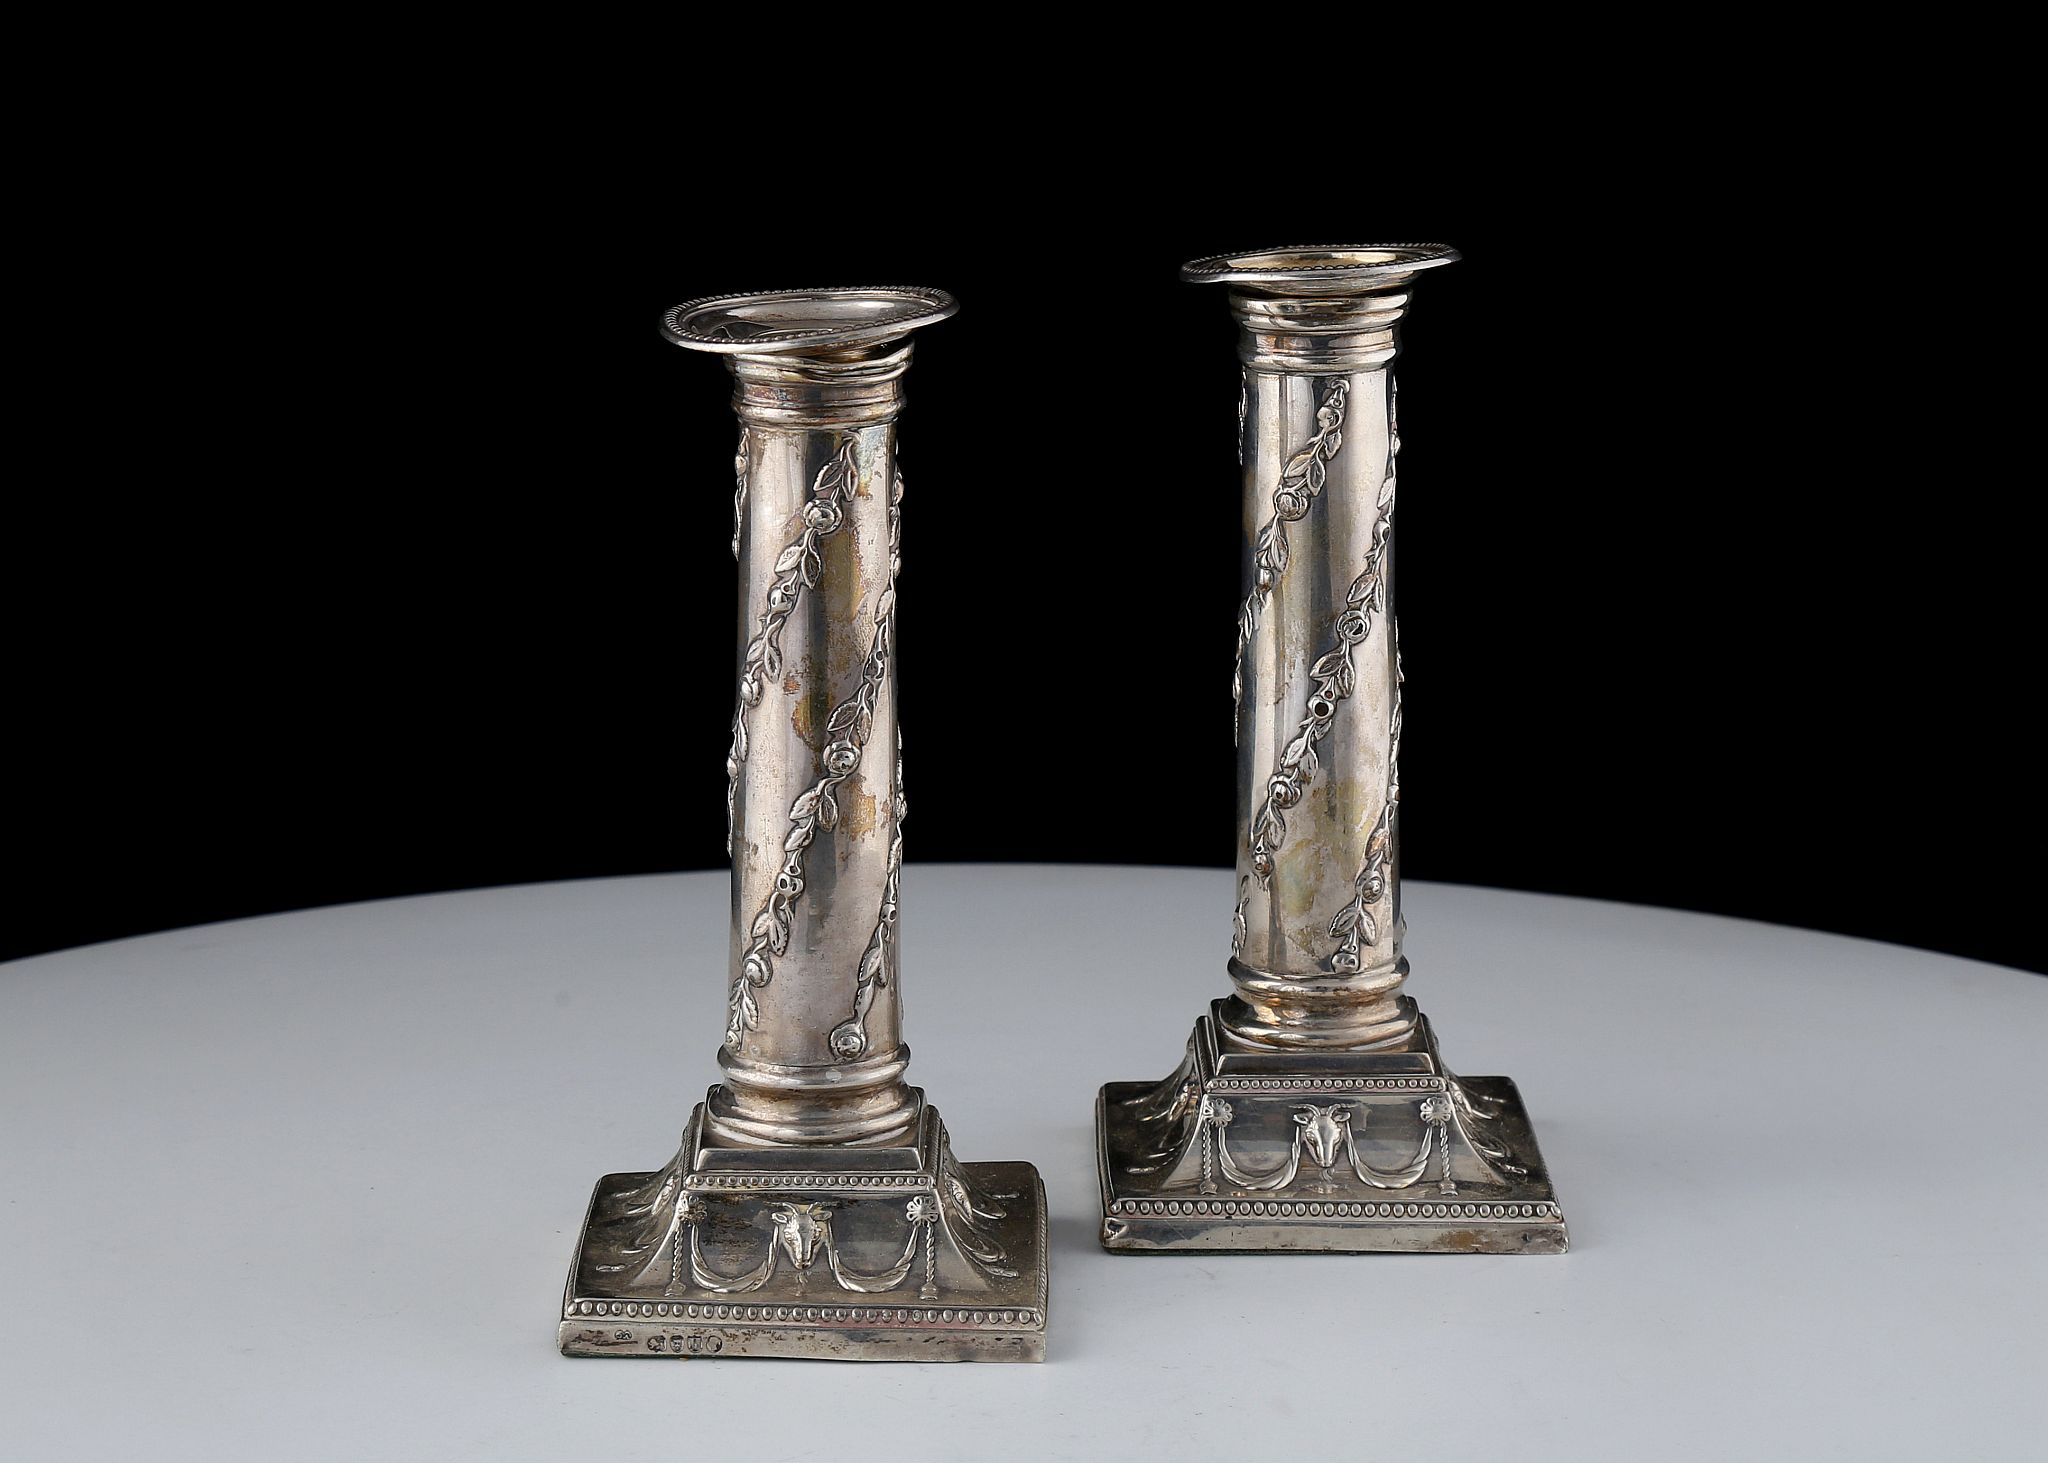 Pair of Antique Victorian Sterling Silver candlesticks by Holland, Son & Slater, London 1881. With